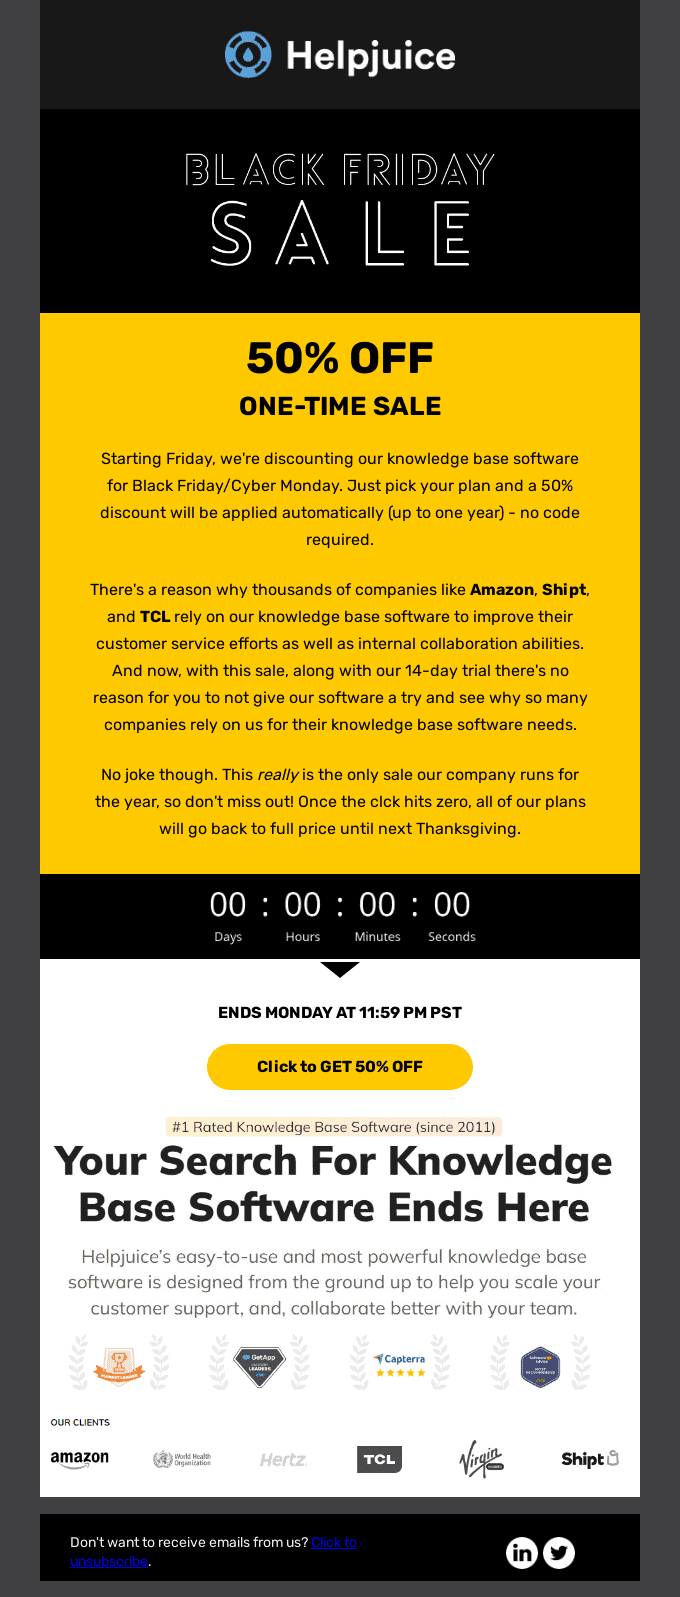 Helpjuice's Black Friday marketing email